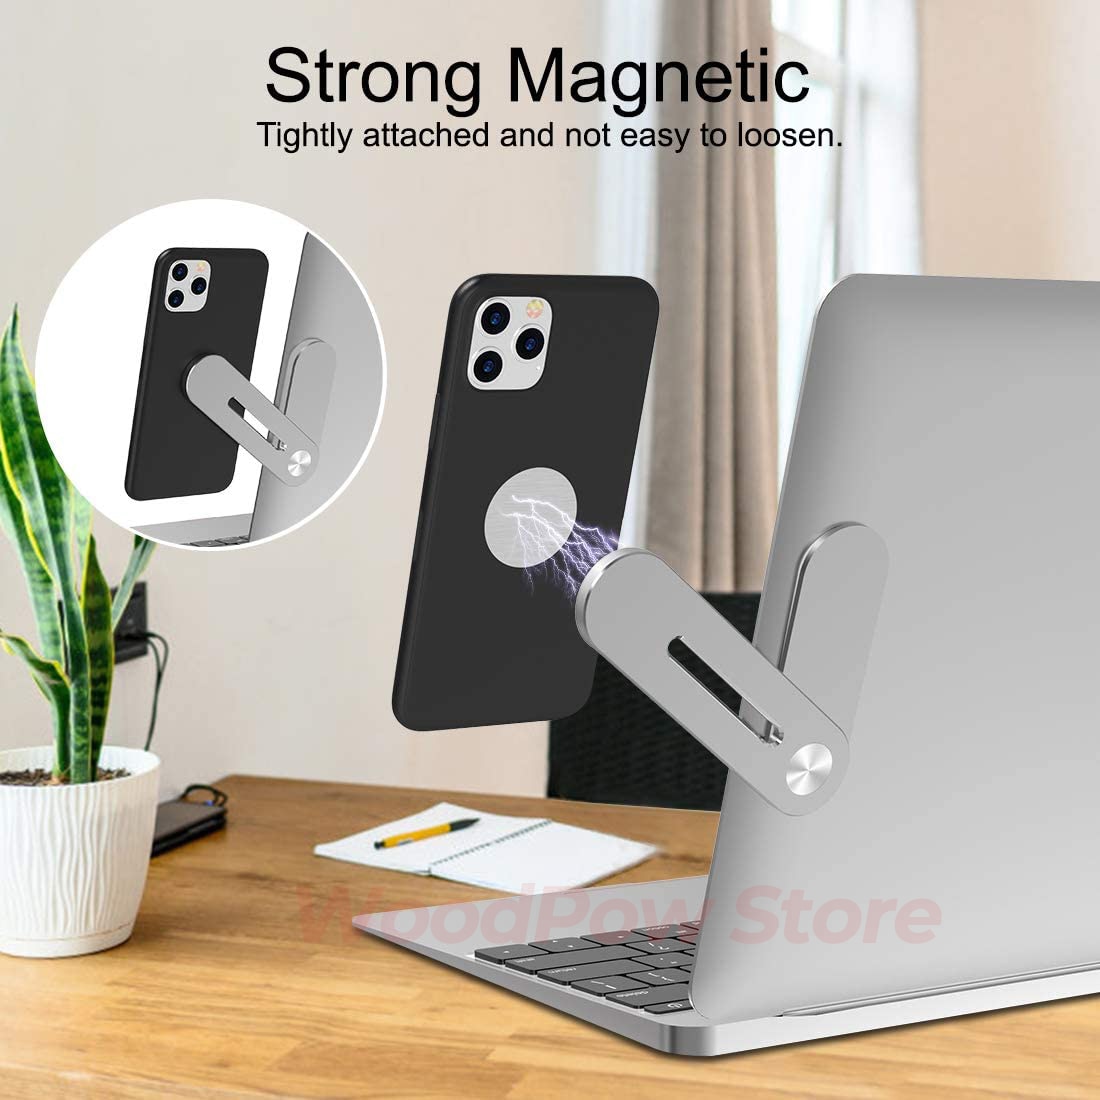 Magnetic Expansion Phone Holder . Change your life